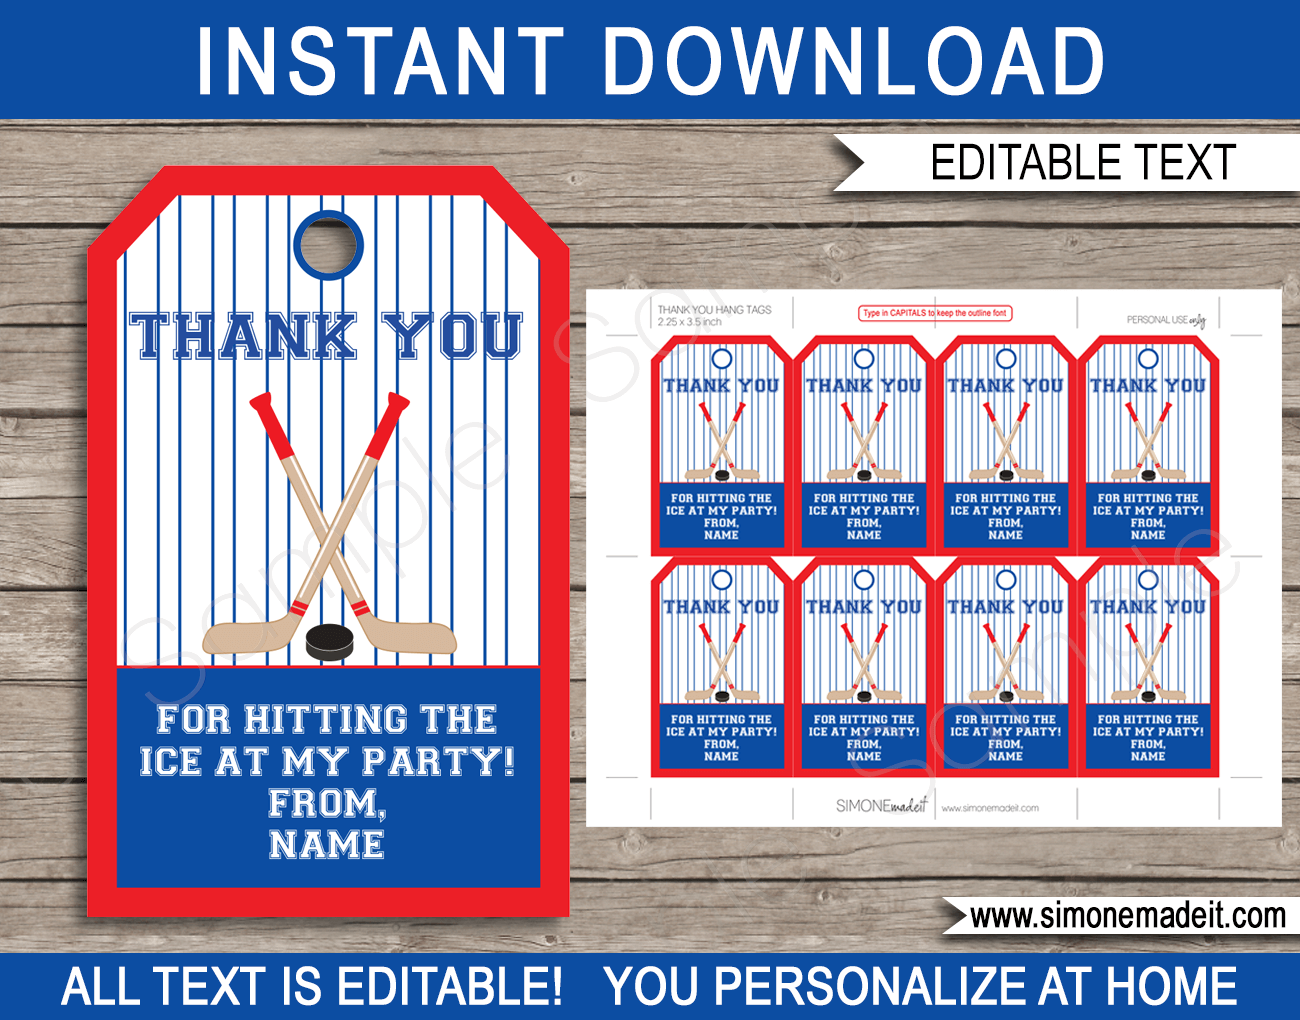 Hockey Party Favor Tags | Thank You Tags | Birthday Party | Editable DIY Template | $3.00 INSTANT DOWNLOAD via SIMONEmadeit.com